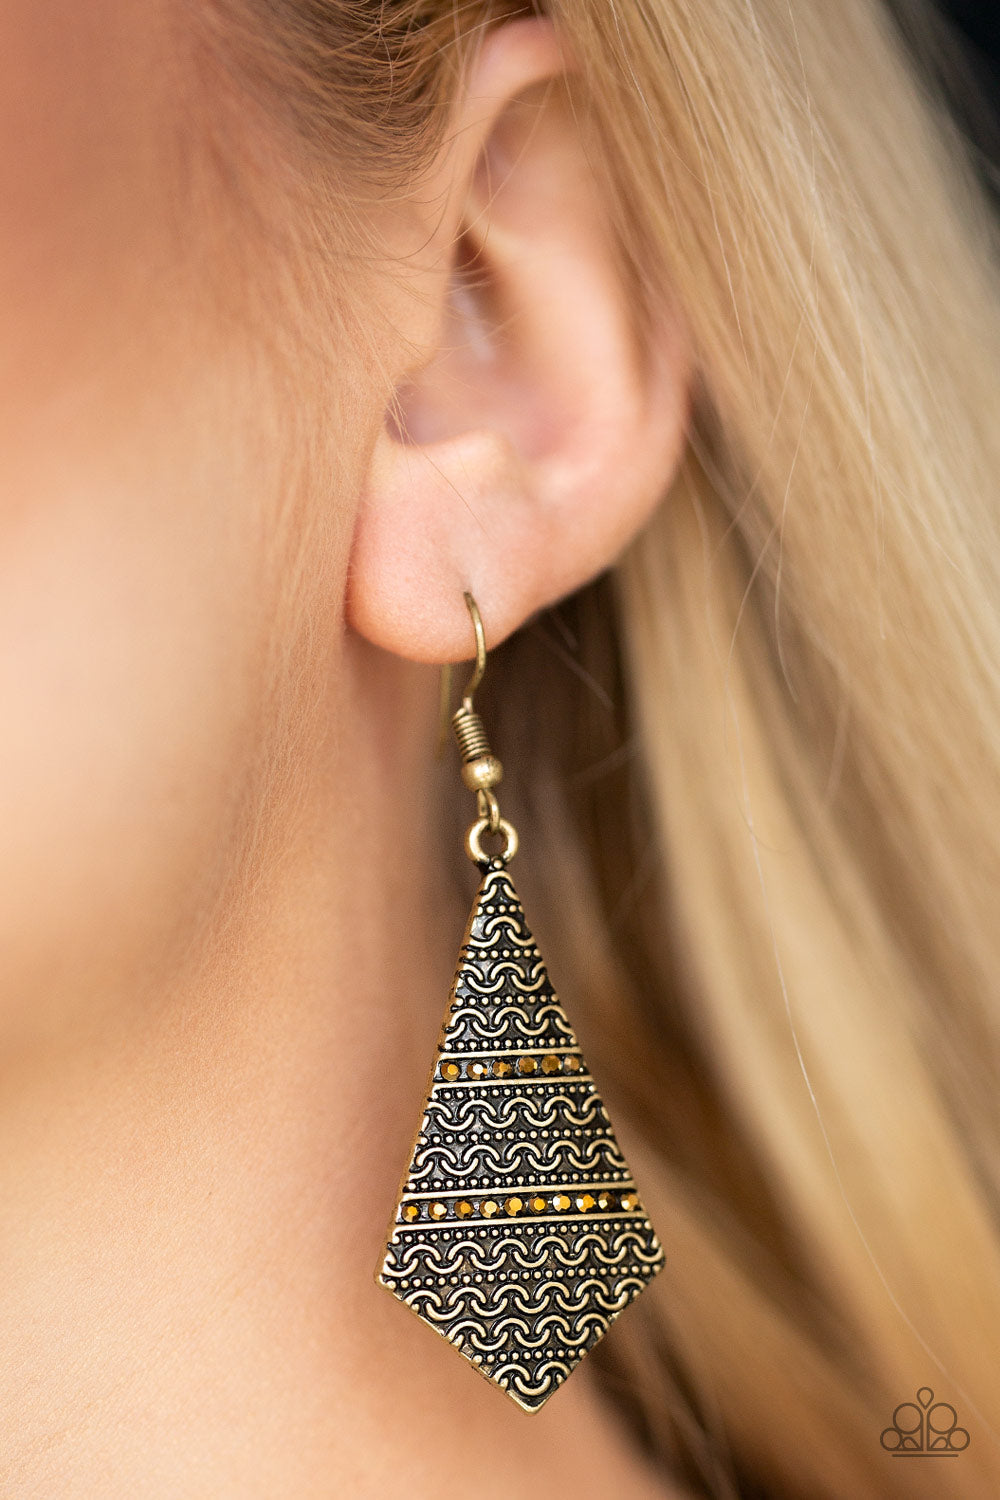 Terra Trending - Brass Fashion Earrings - Paparazzi Accessories - Radiating with tribal inspired patterns, a flared brass frame swings from the ear in an edgy fashion. Rows of dainty aurum rhinestones are pressed into the lure for a shimmery finish. Earring attaches to a standard fishhook fitting.